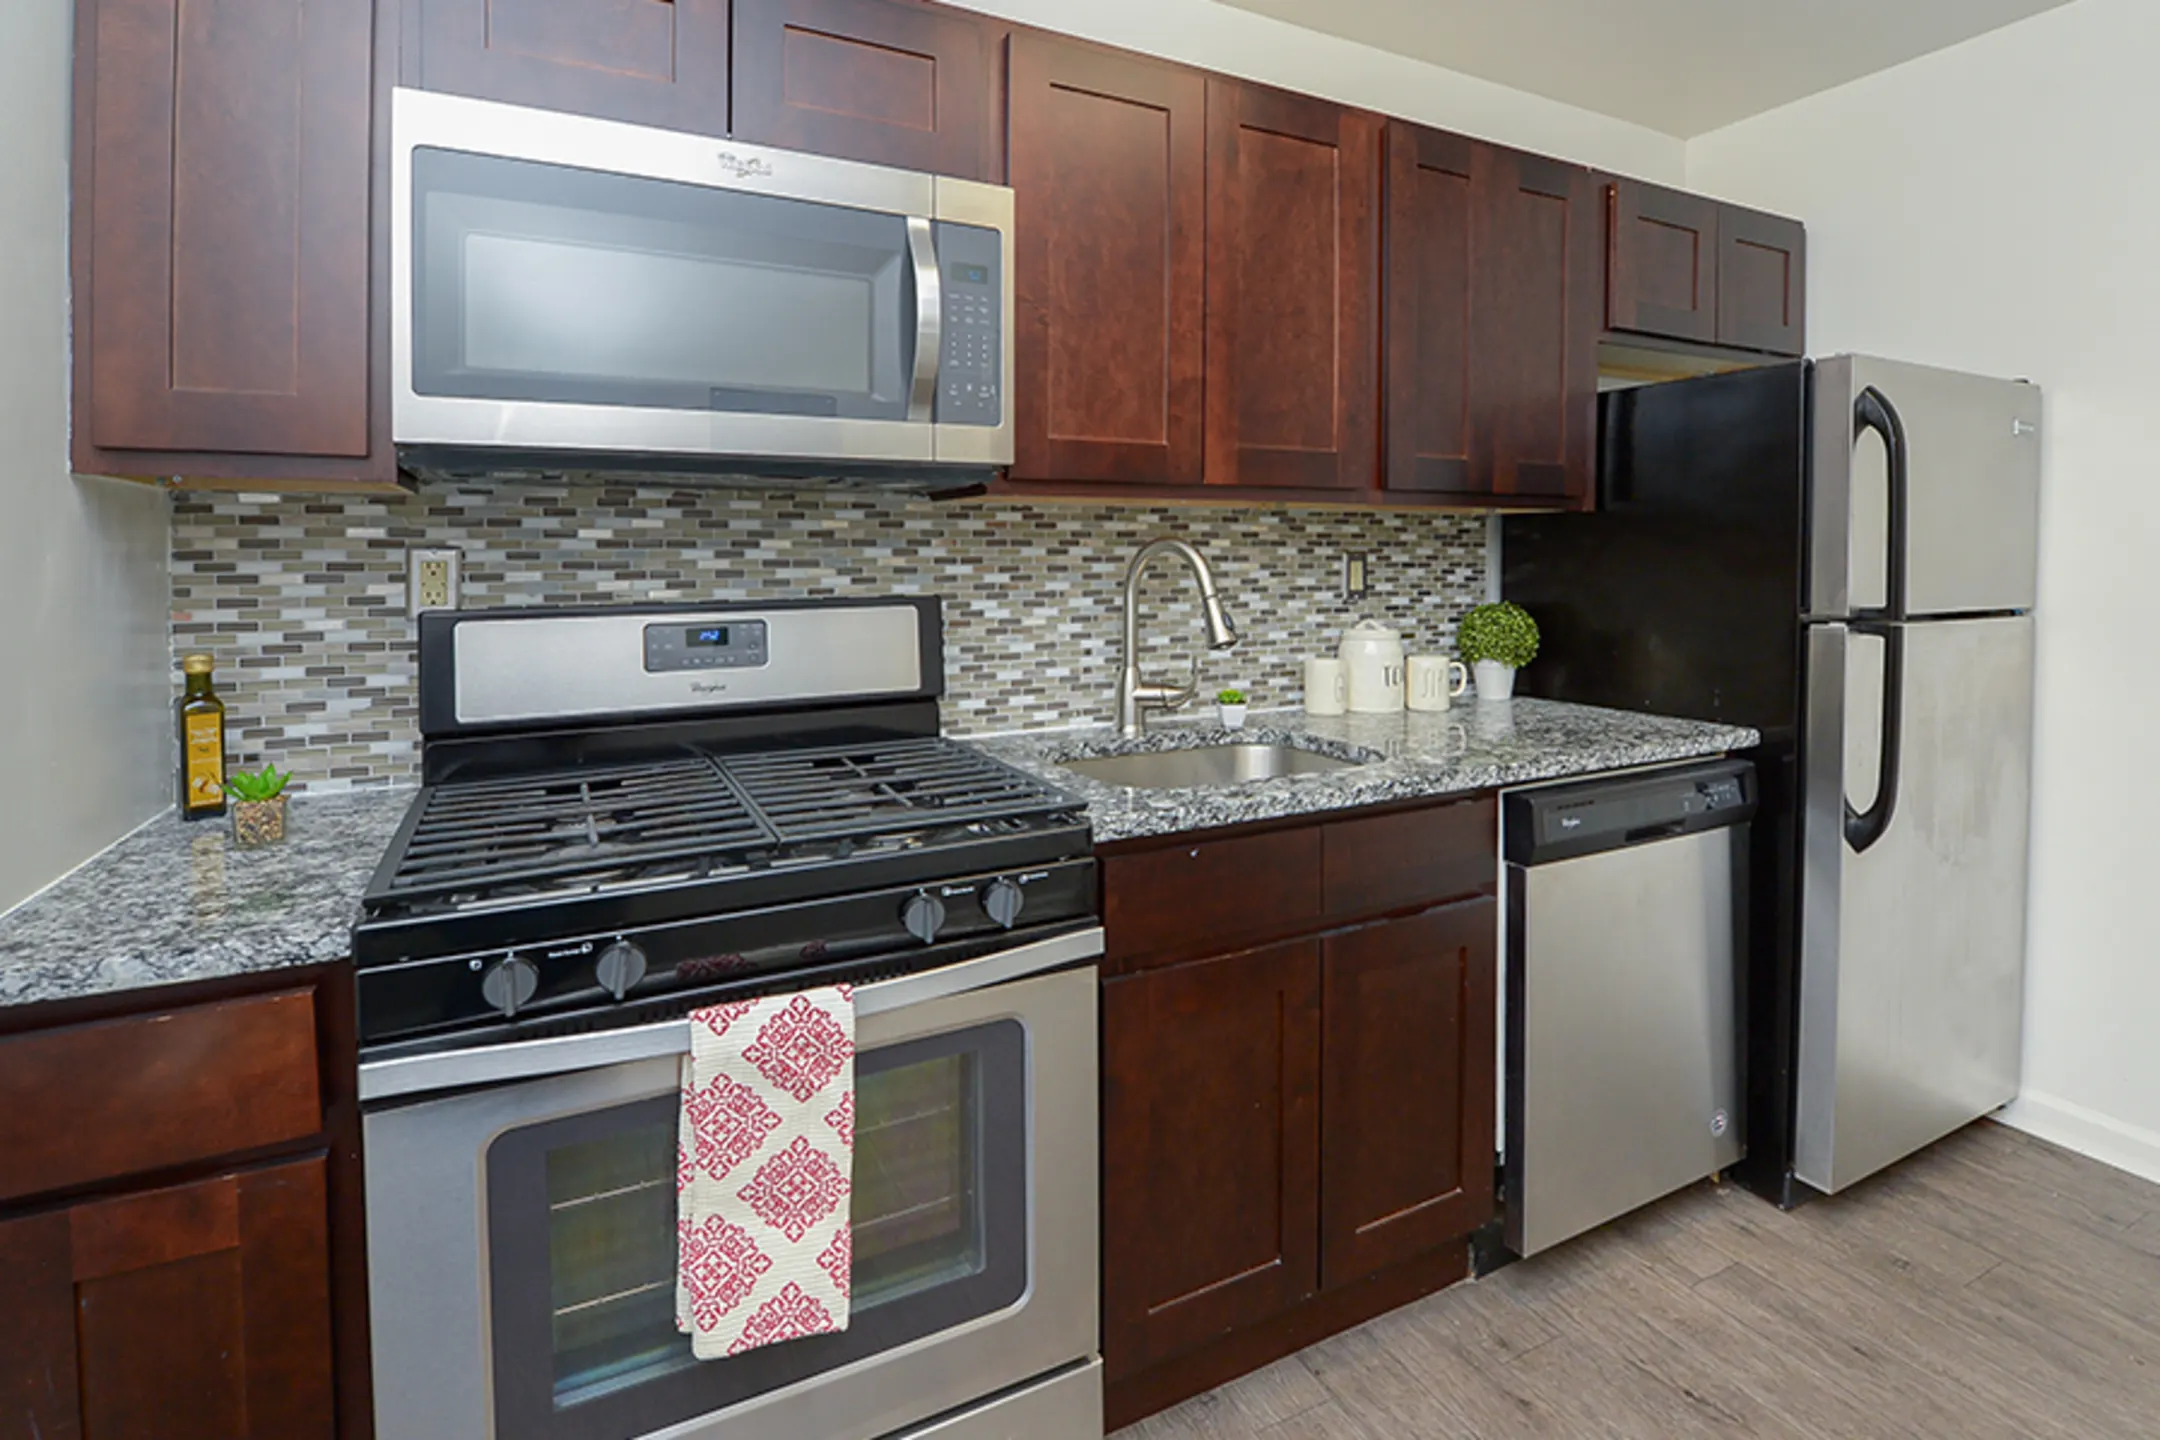 Kitchen - Duncan Hill Apartments & Townhomes - Westfield, NJ